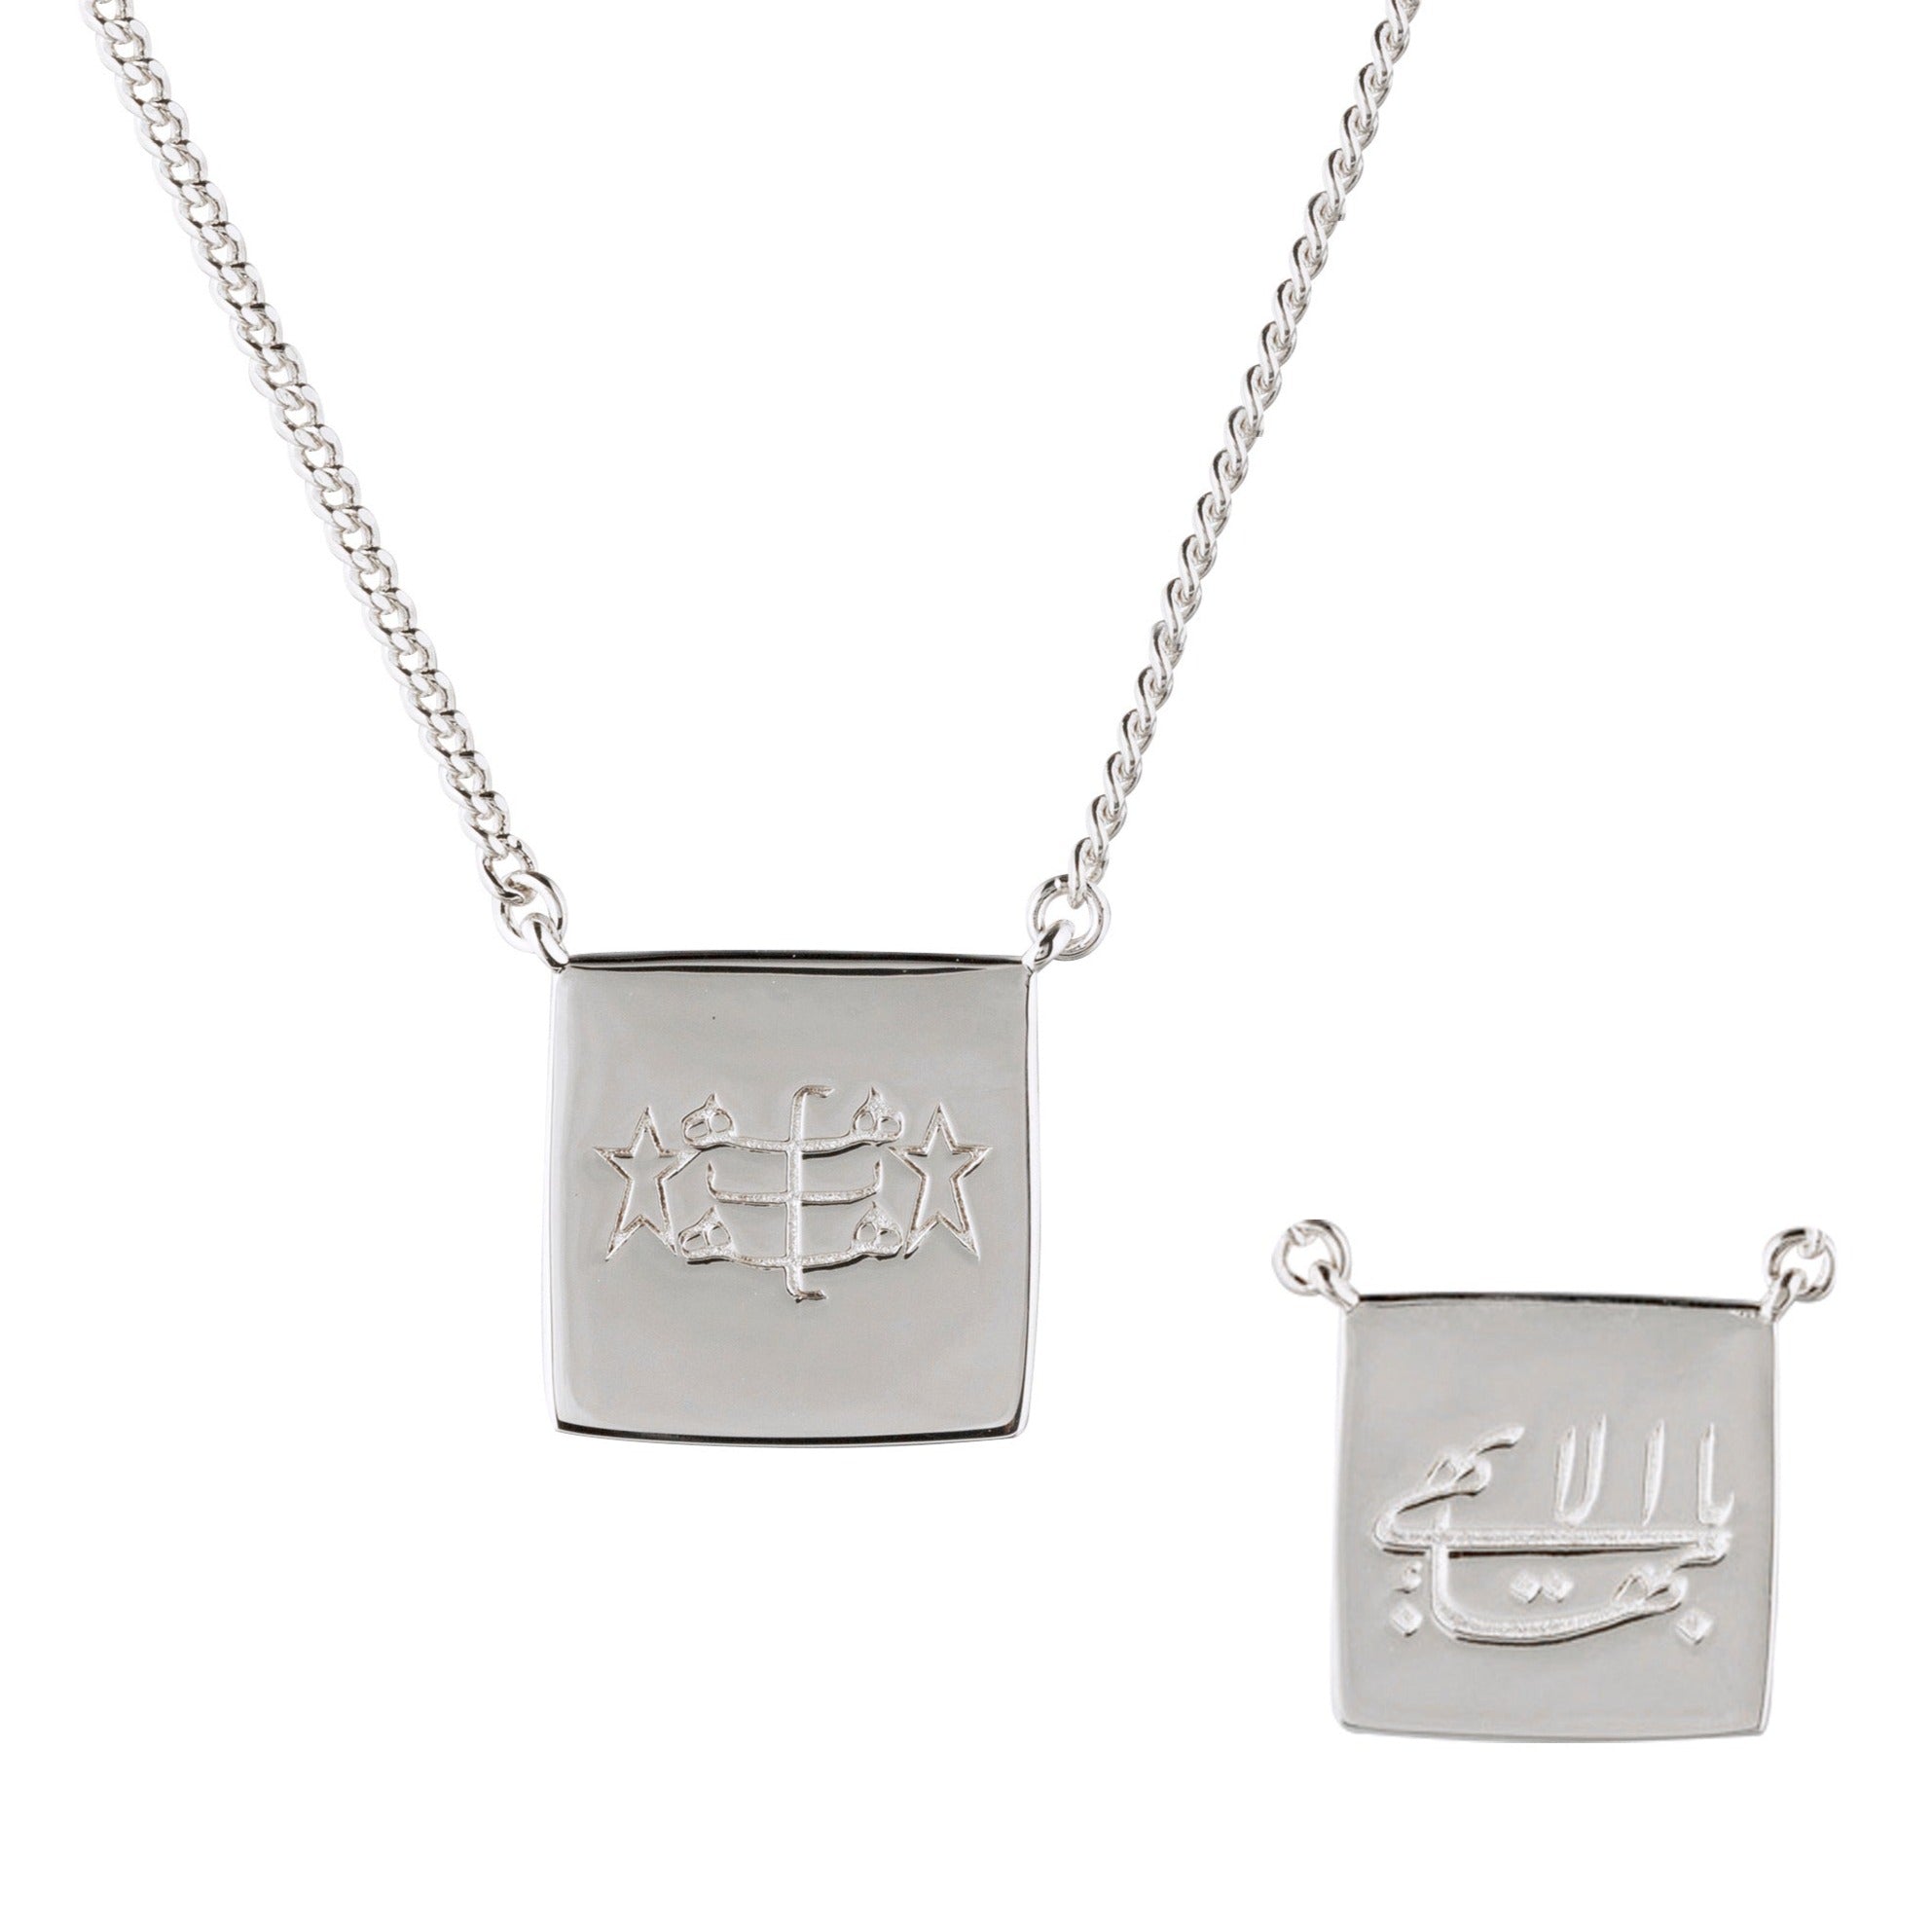 simple silver cushion Baha'i necklace with an engraving of the Greatest Name in Arabic and ringstone symbol on both sides